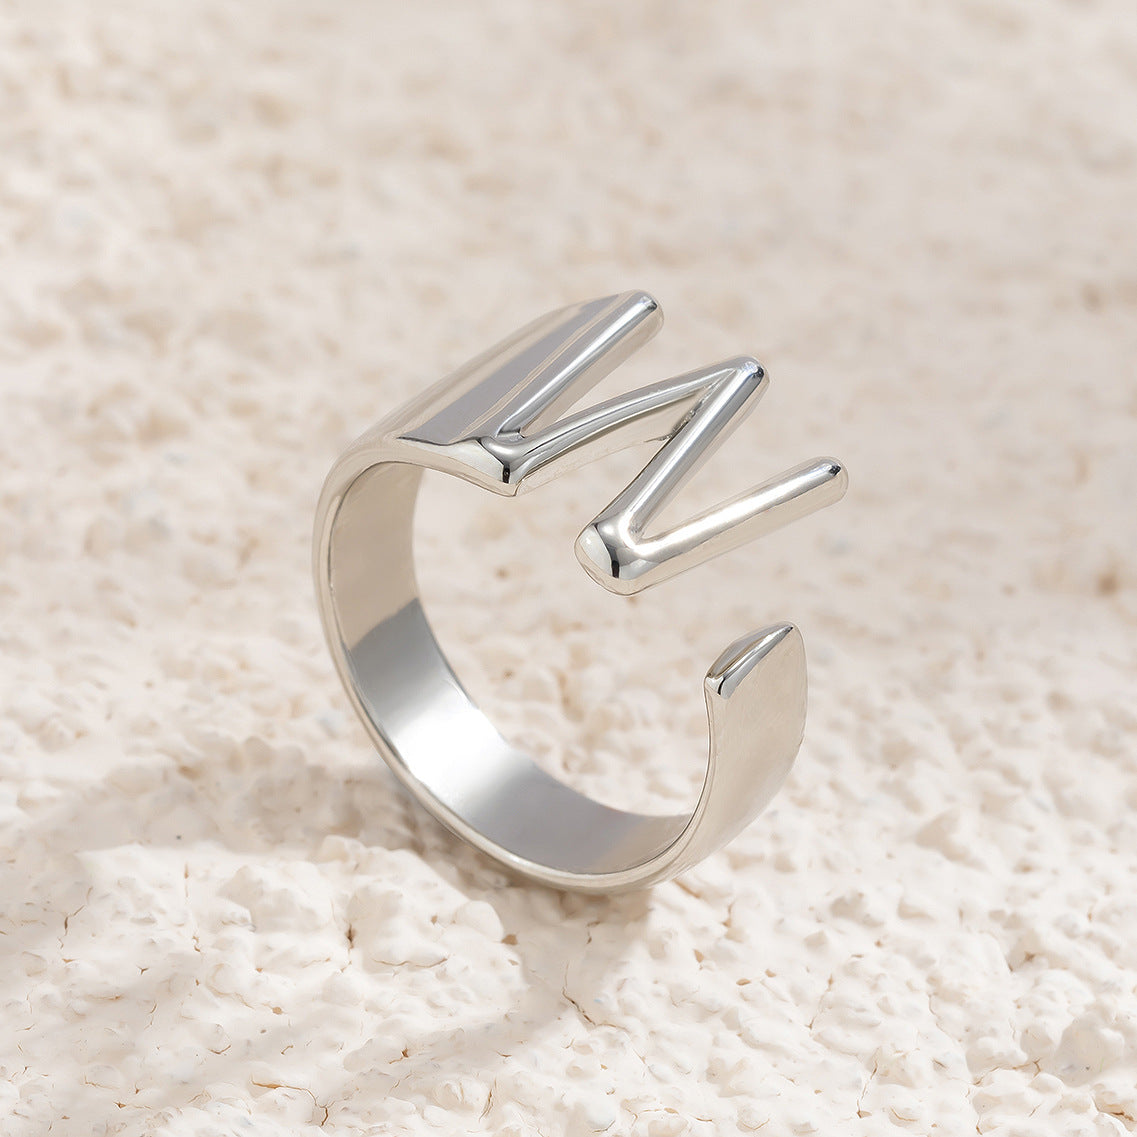 Geometric Letter Ring with Hollow Design - Adjustable Alloy Material Statement Jewelry